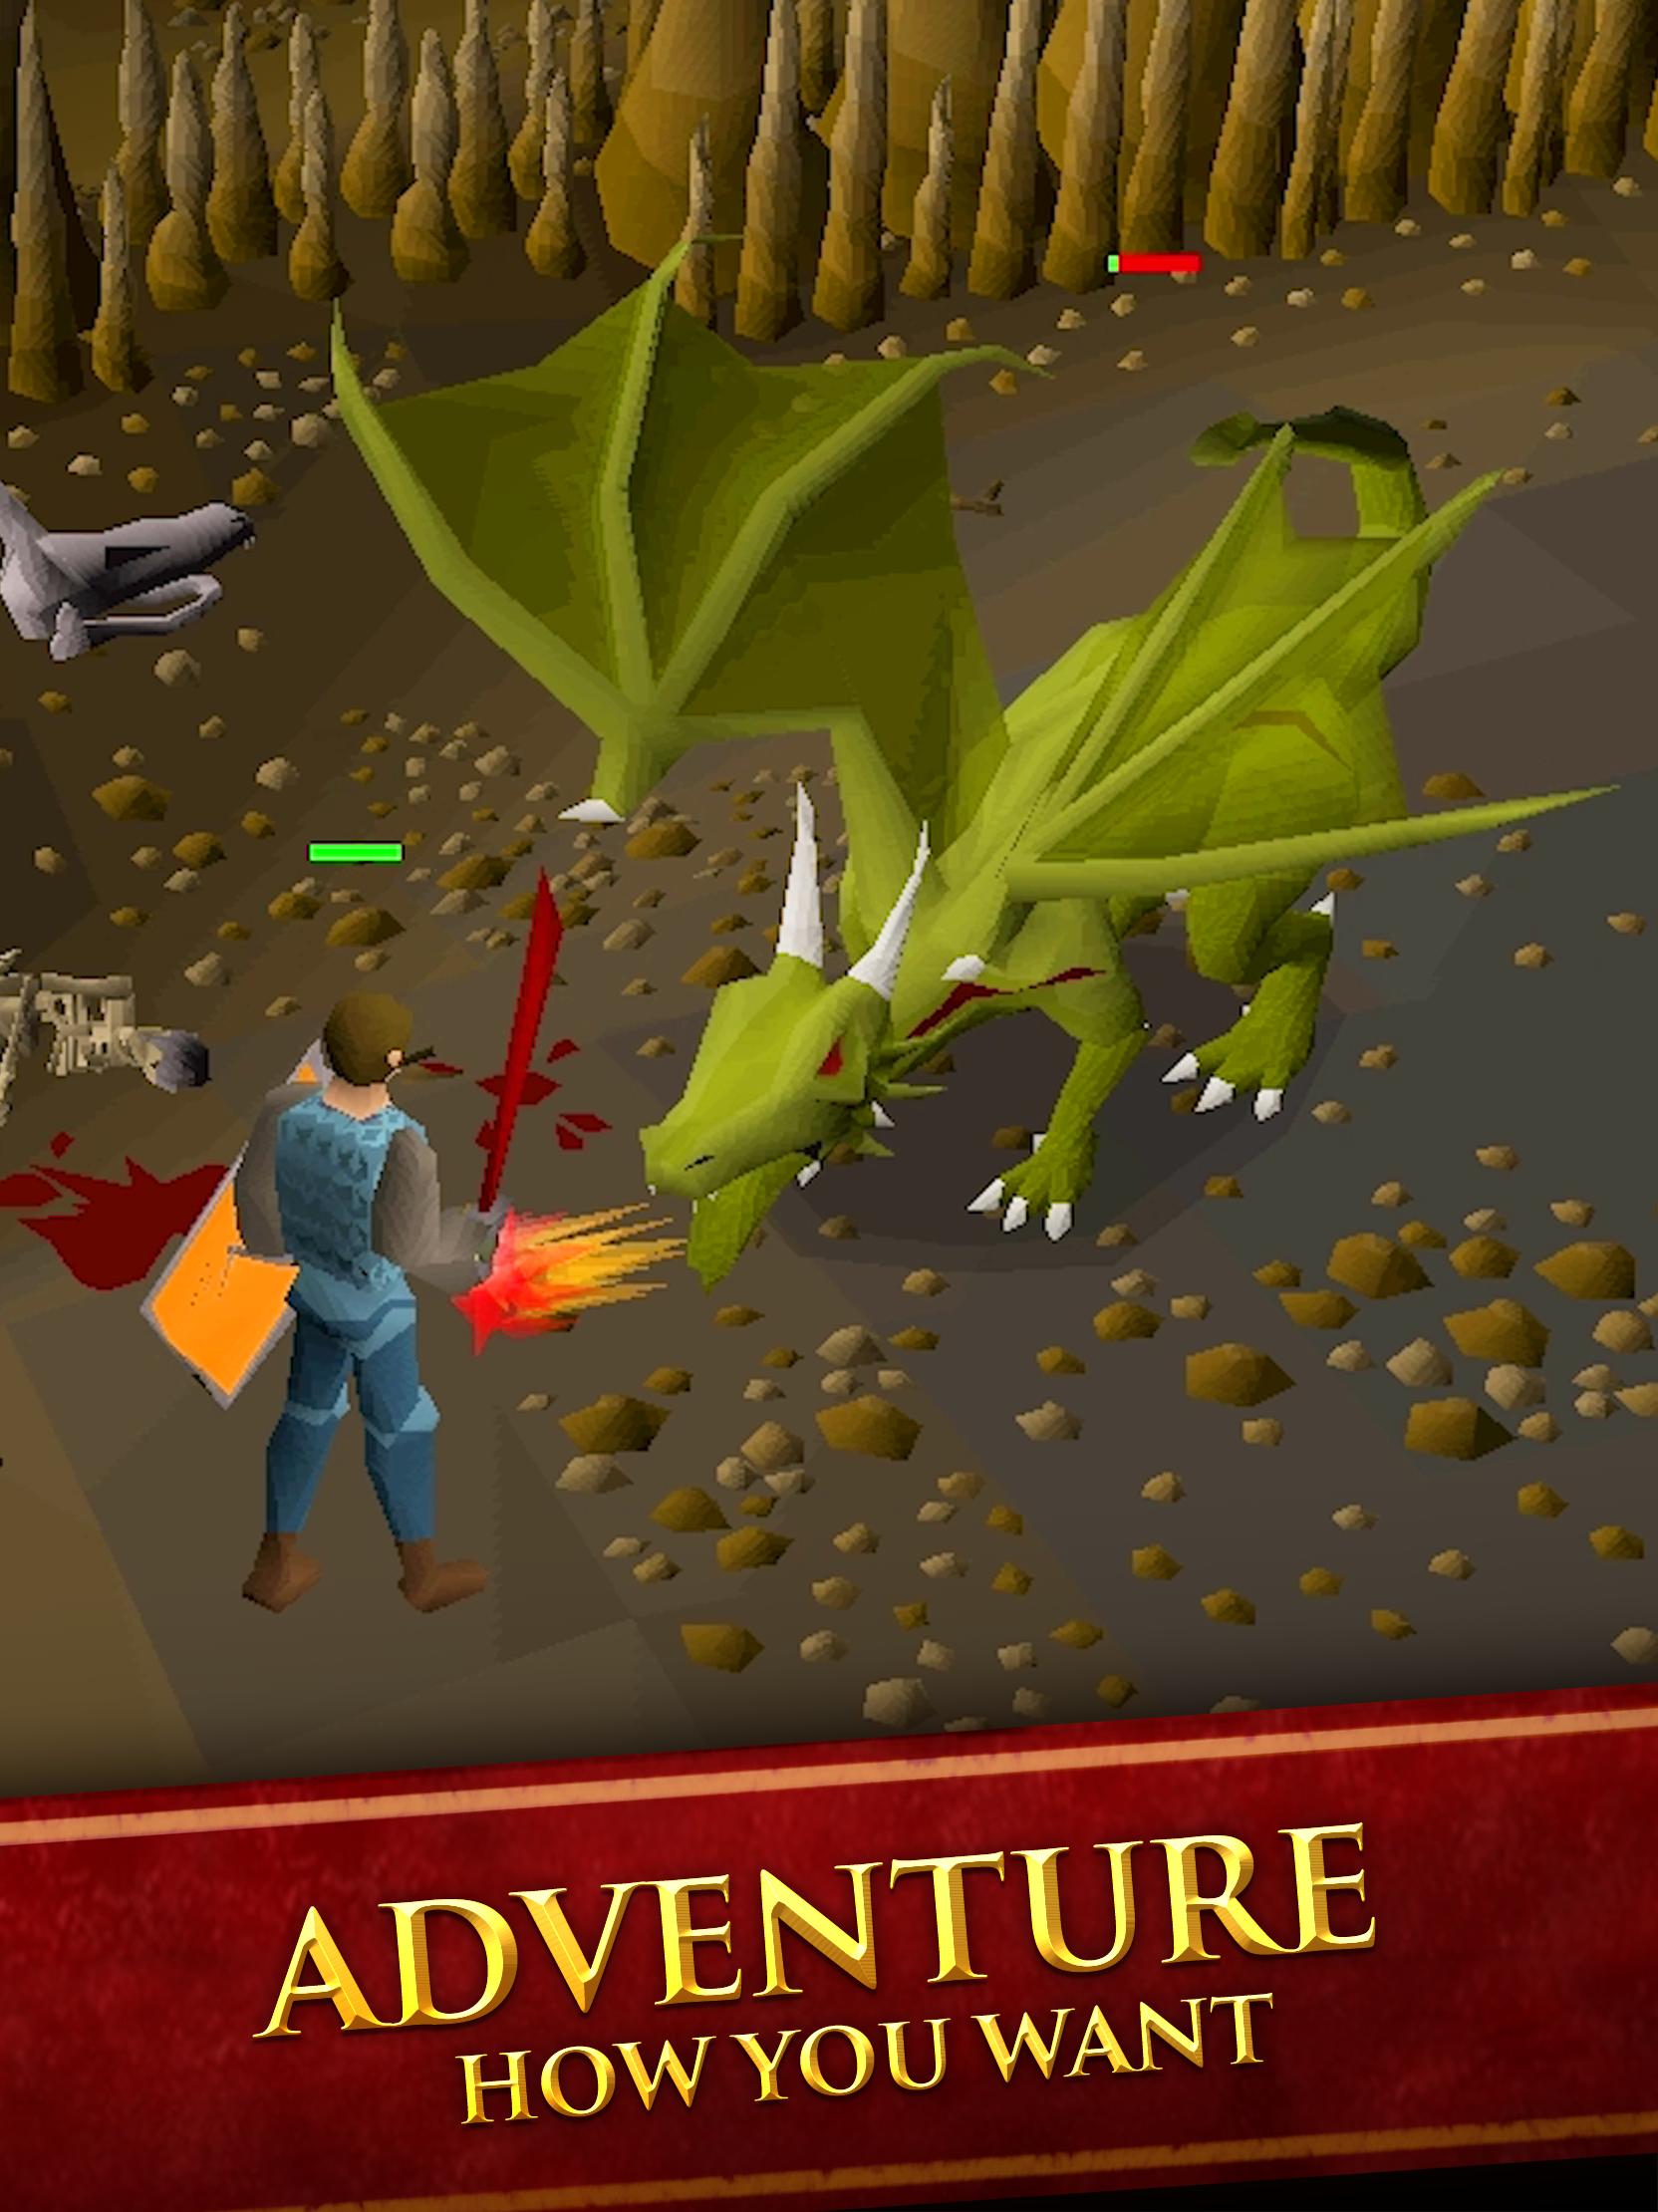 Old School Runescape Apk For Android Download